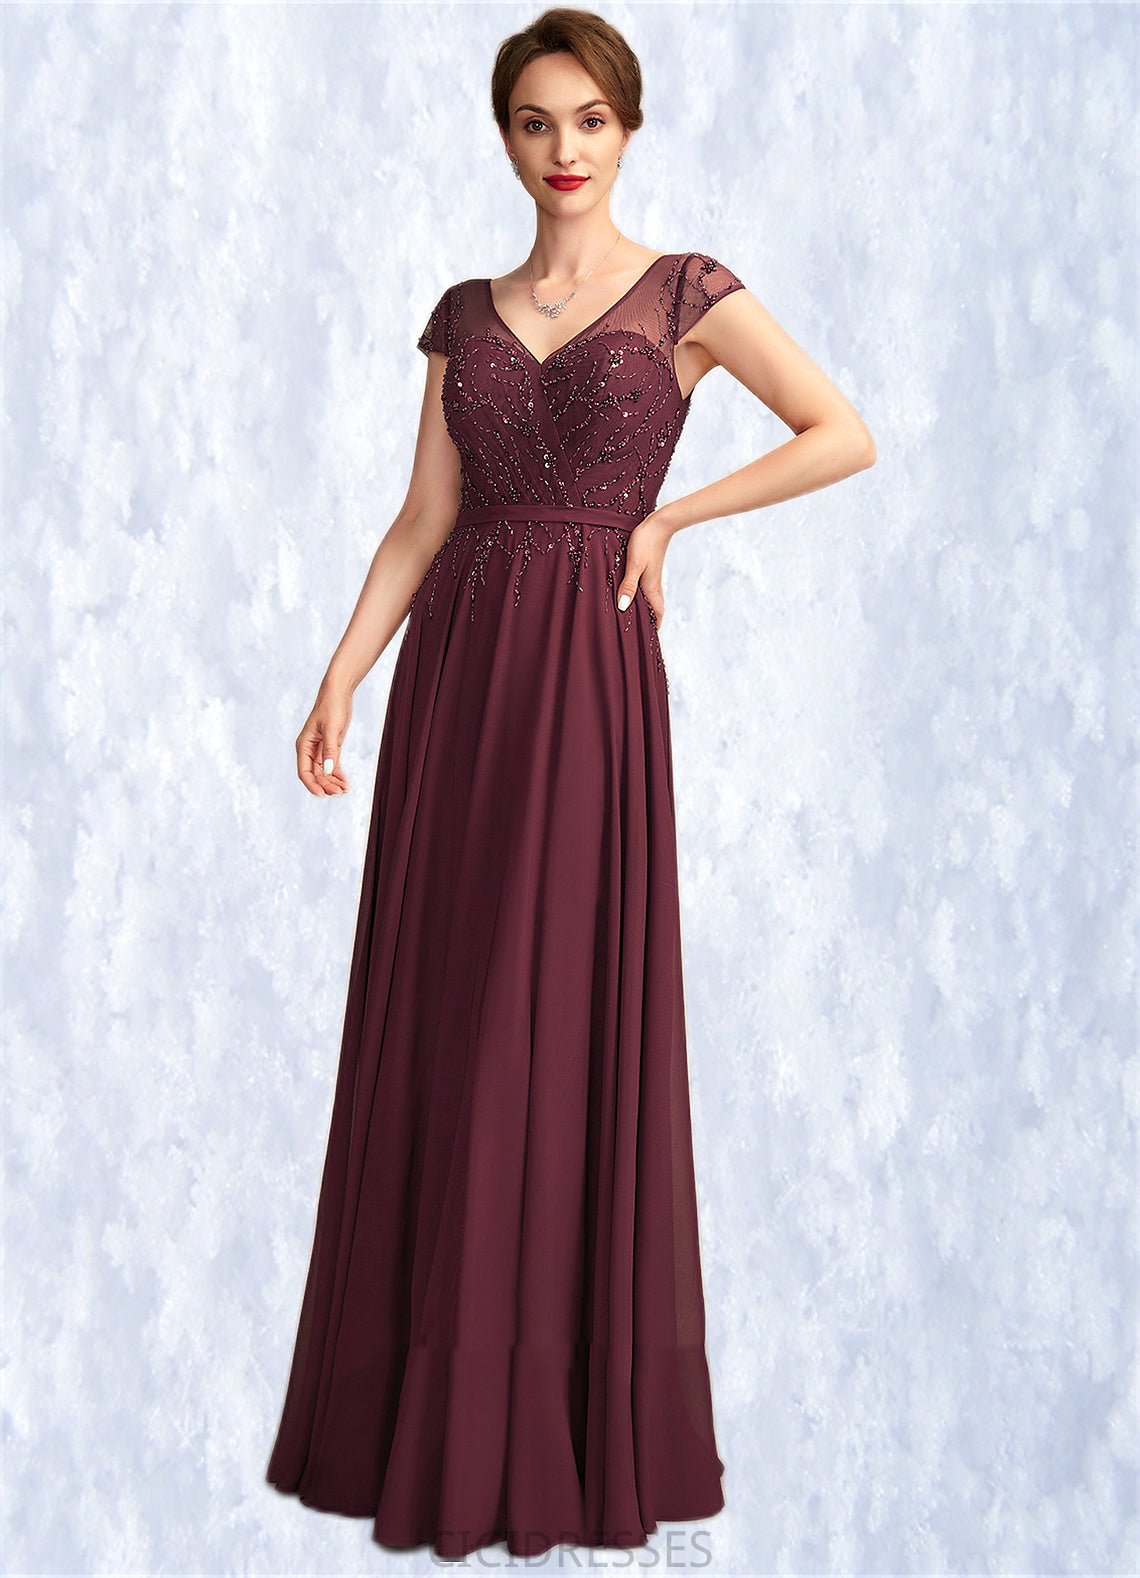 Karen A-Line V-neck Floor-Length Chiffon Mother of the Bride Dress With Beading Sequins CIC8126P0015028